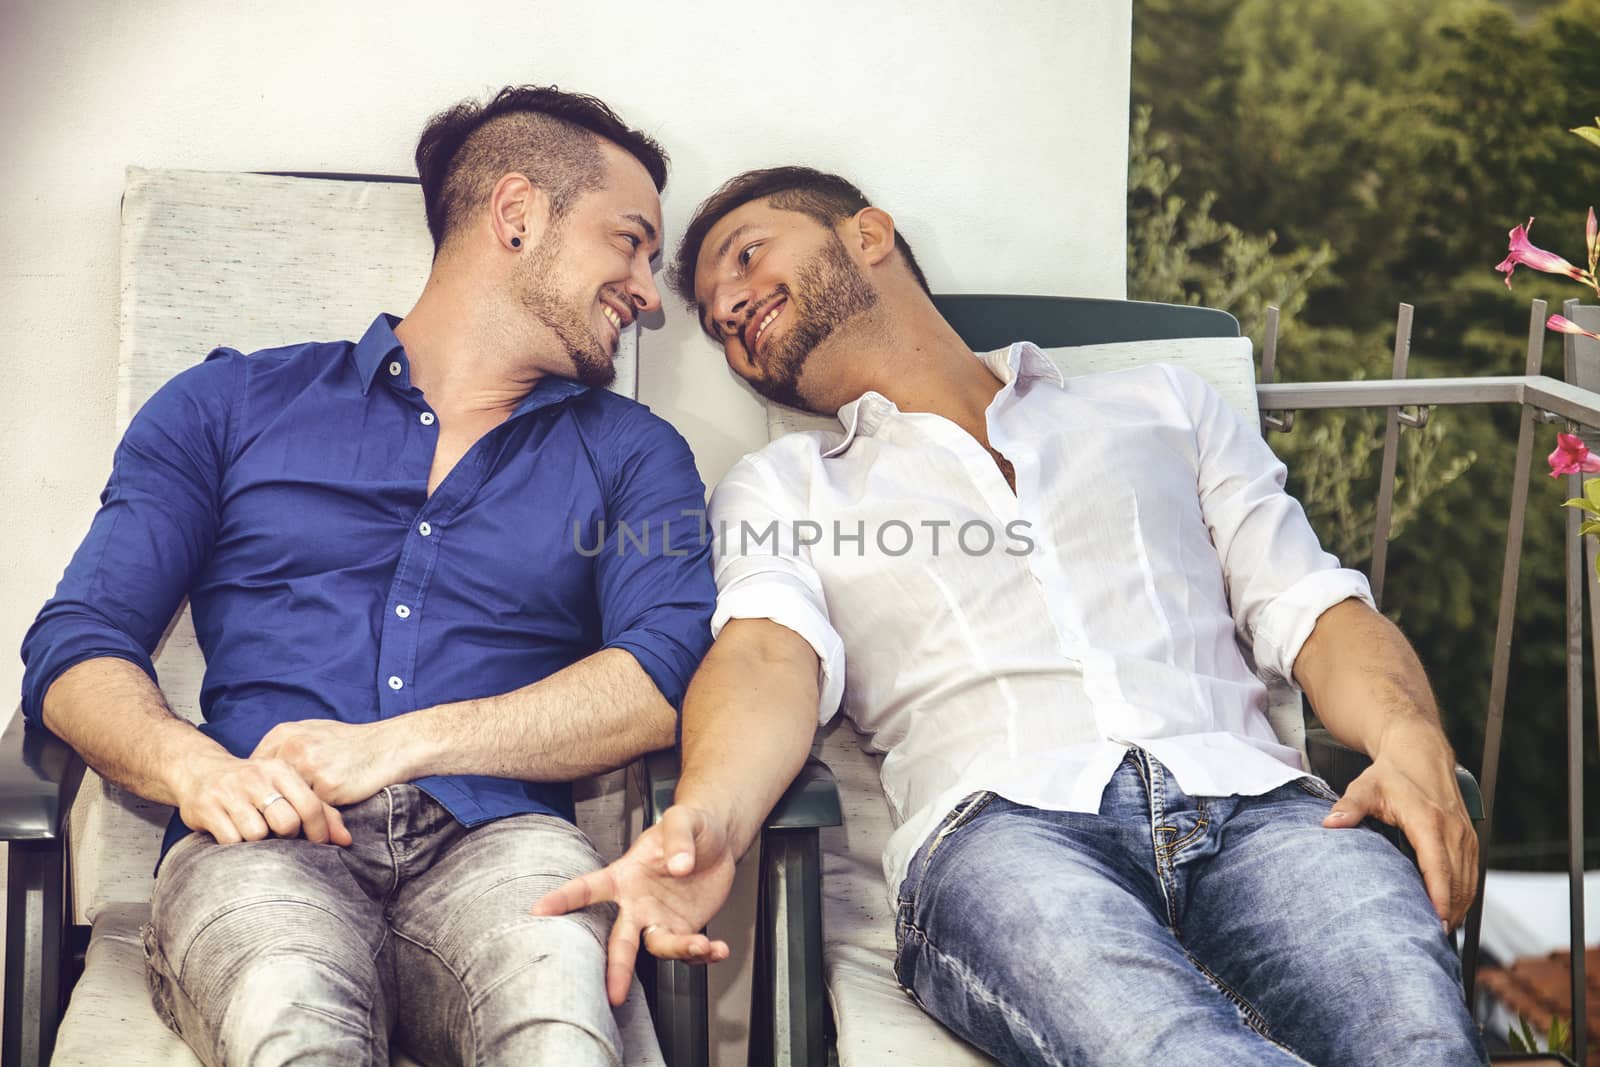 Two gays sitting on chairs at balcony holding hands and looking at each other.